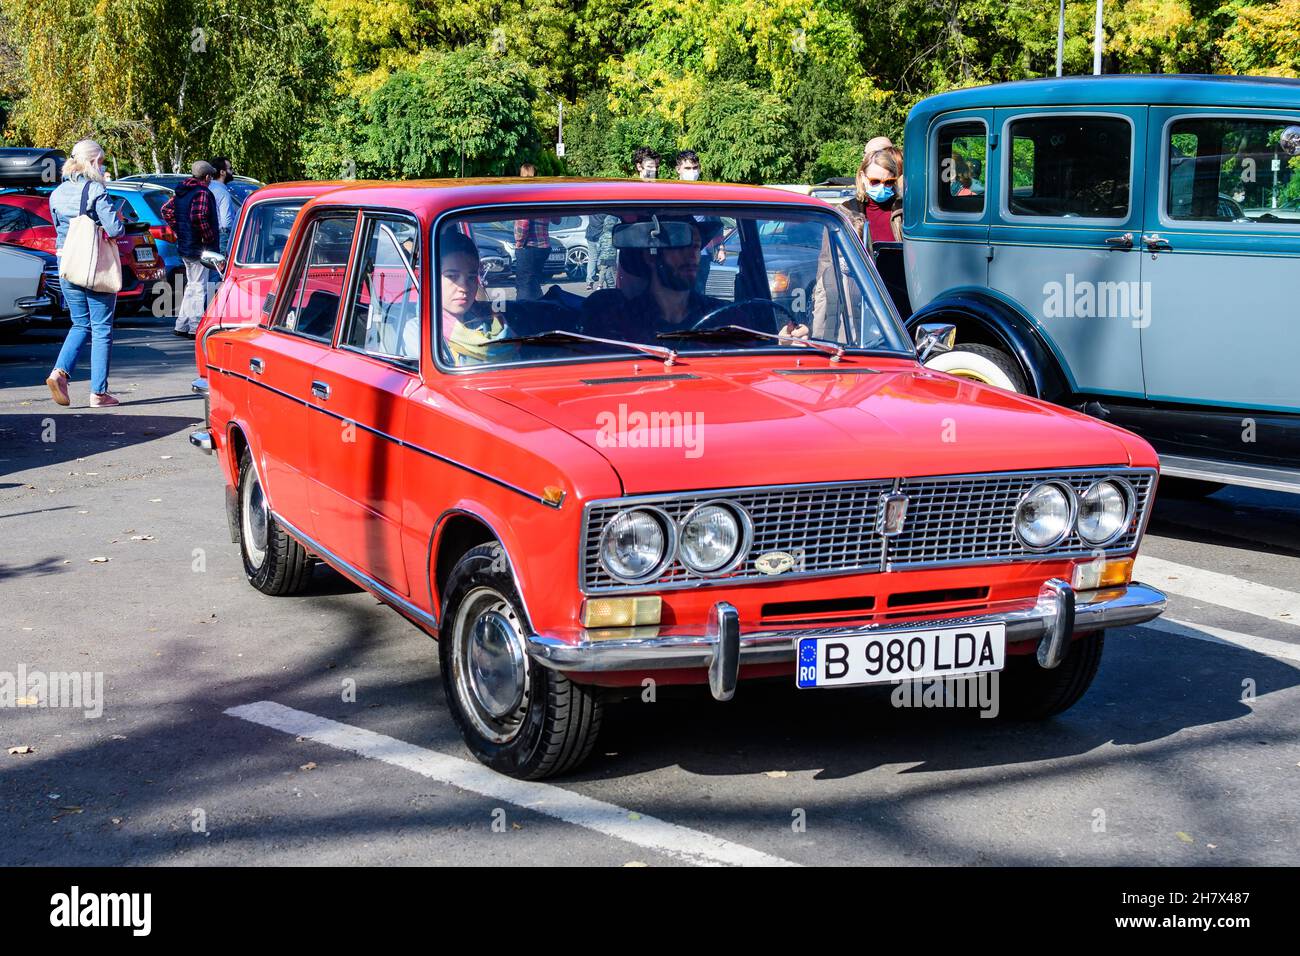 Bucharest, Romania, 24 October 2021: One red Lada vintage car in traffic in a street at an event for vintage cars collections, in a sunny autumn day Stock Photo